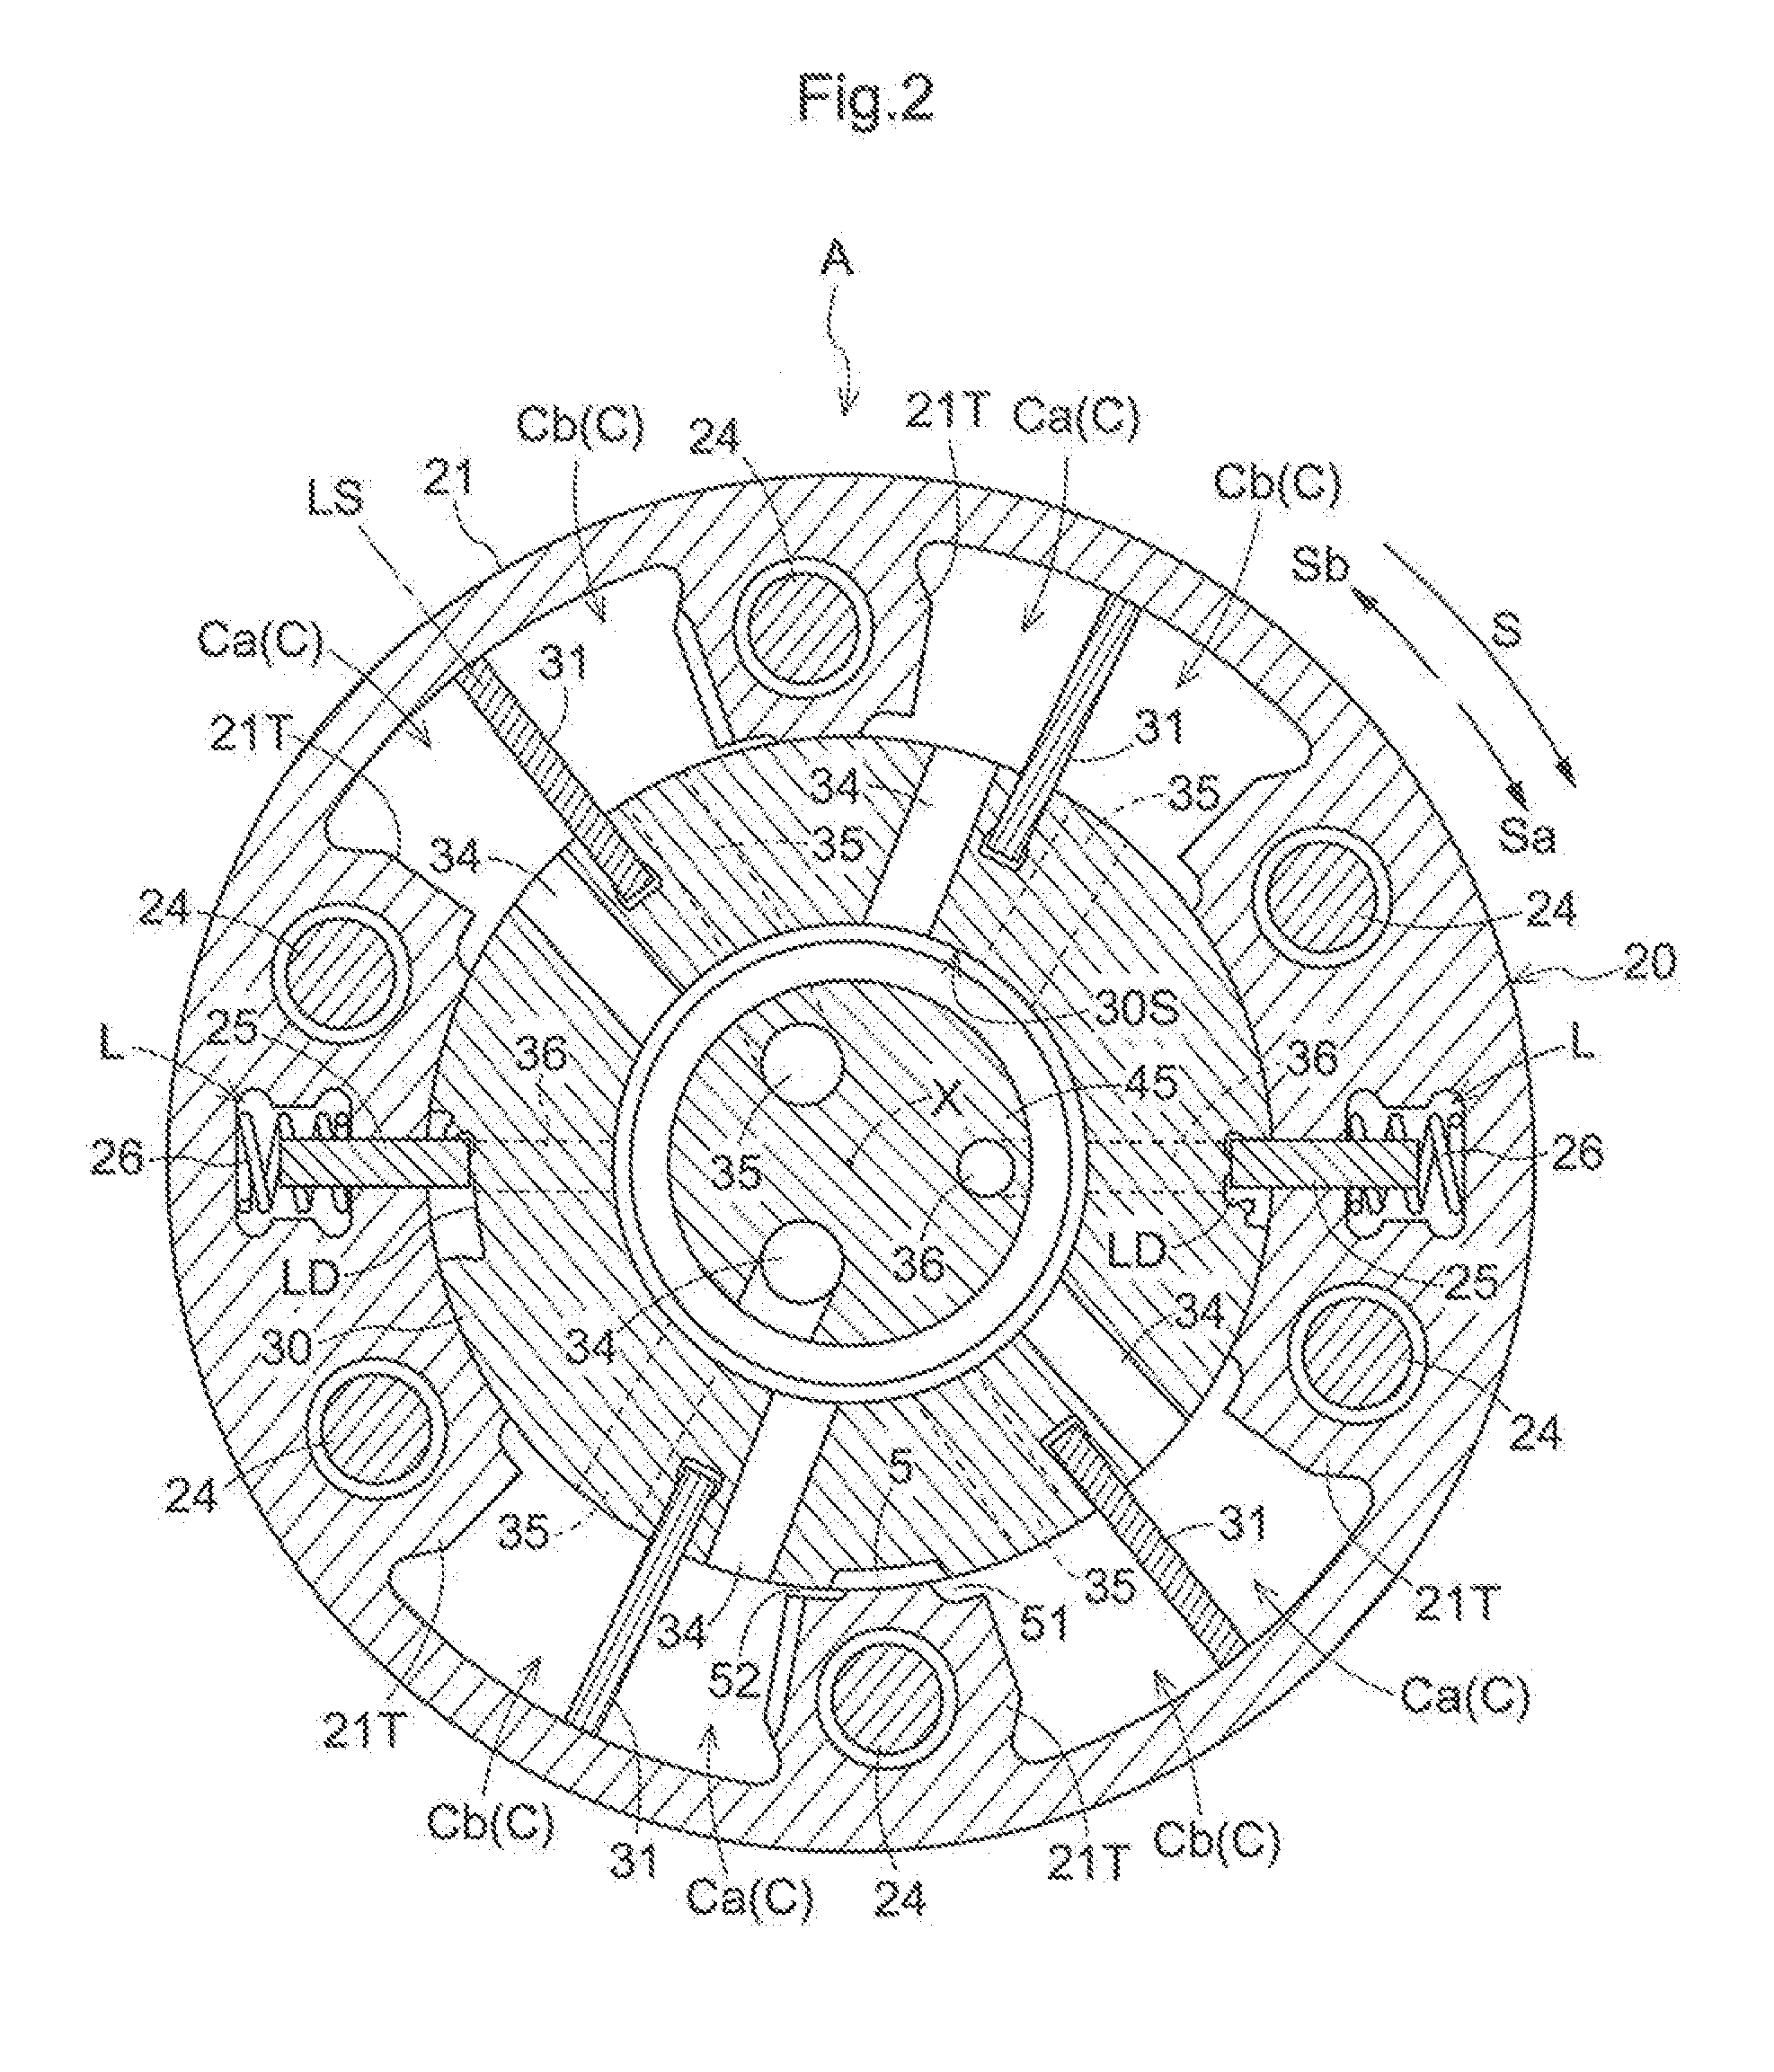 Valve opening/closing timing control device